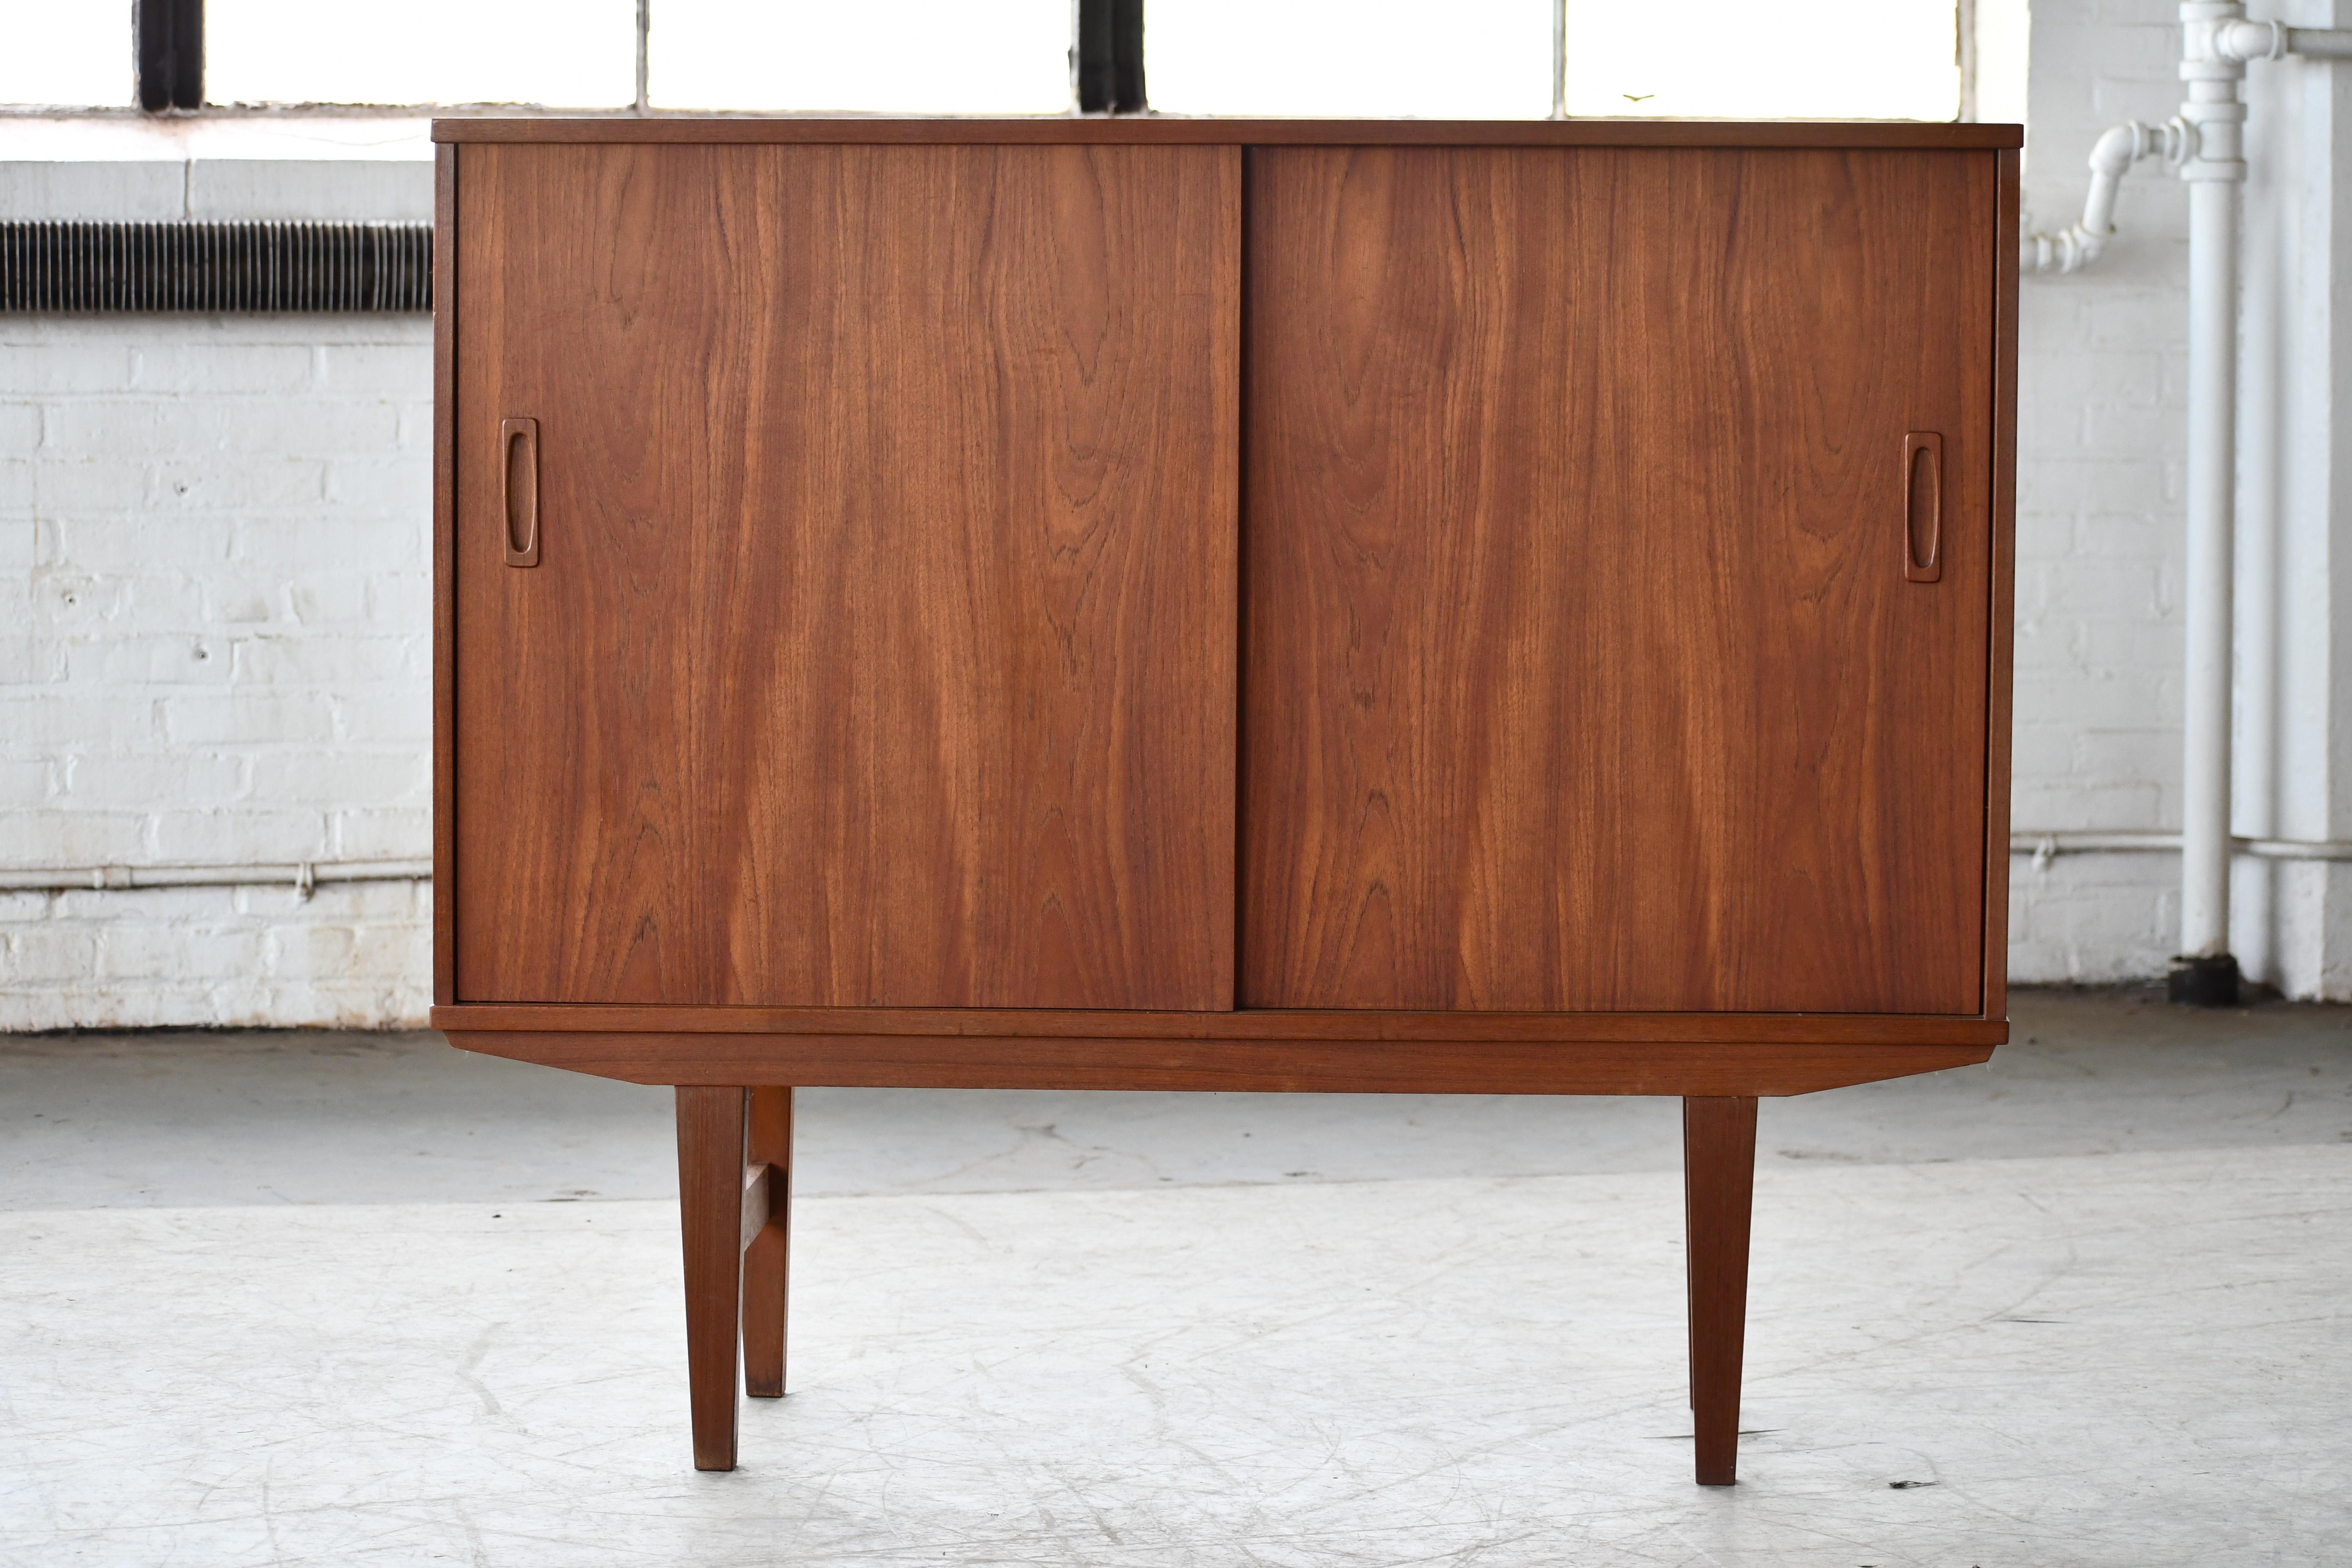 Small charming Danish Sideboard made from teak sometime ion the 1960's. The piece is unmarked and we are unaware of the designer and maker. Nice with drawers inside for cutlery make in a contrasting maple. Small bar with mirrored back in patterned